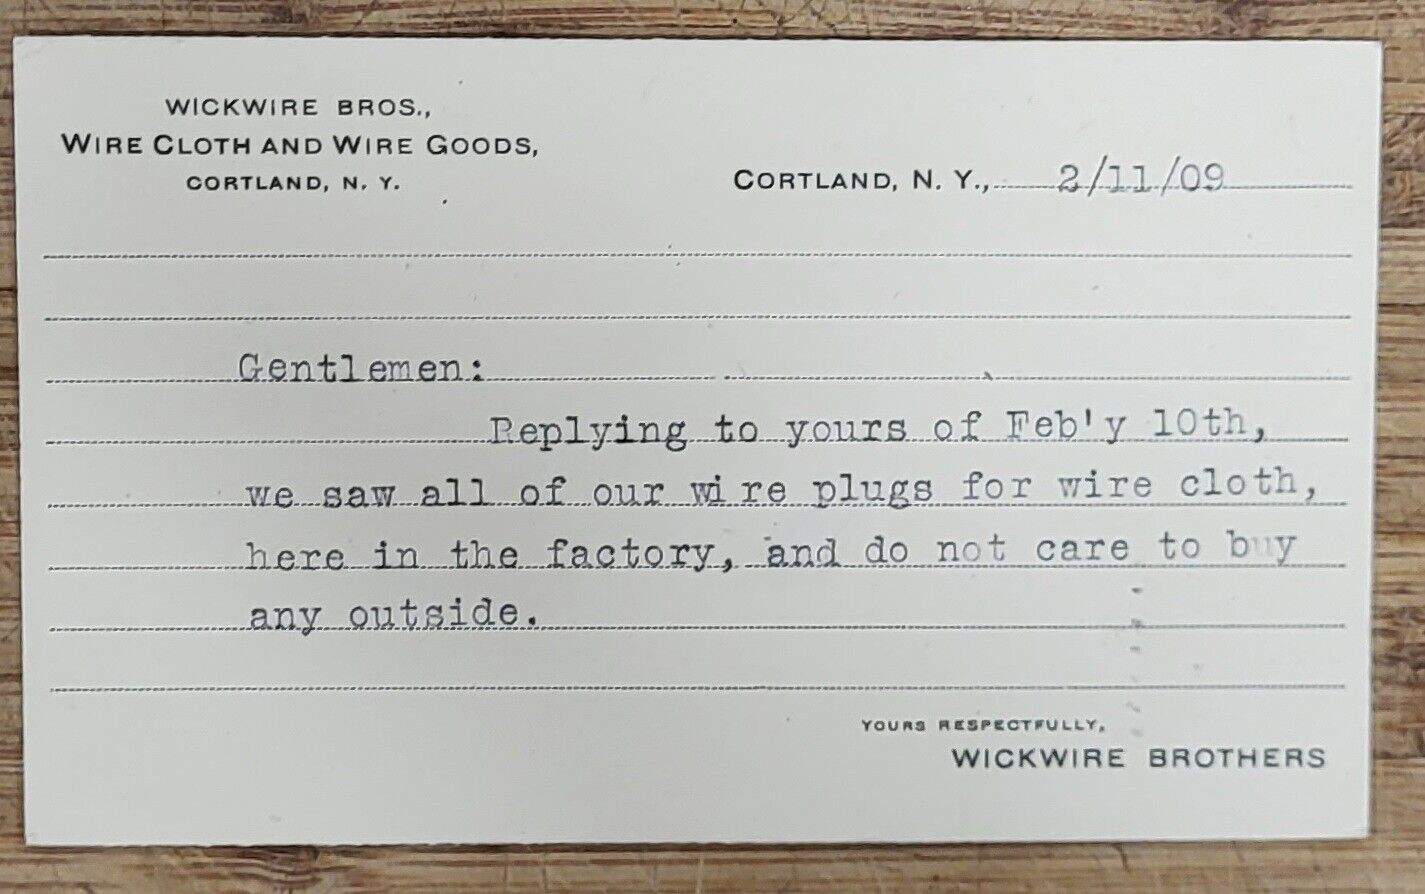 1909 Post Card New York Bleecker Peter\'s Cortland Wickwire Brothers Wire Cloth